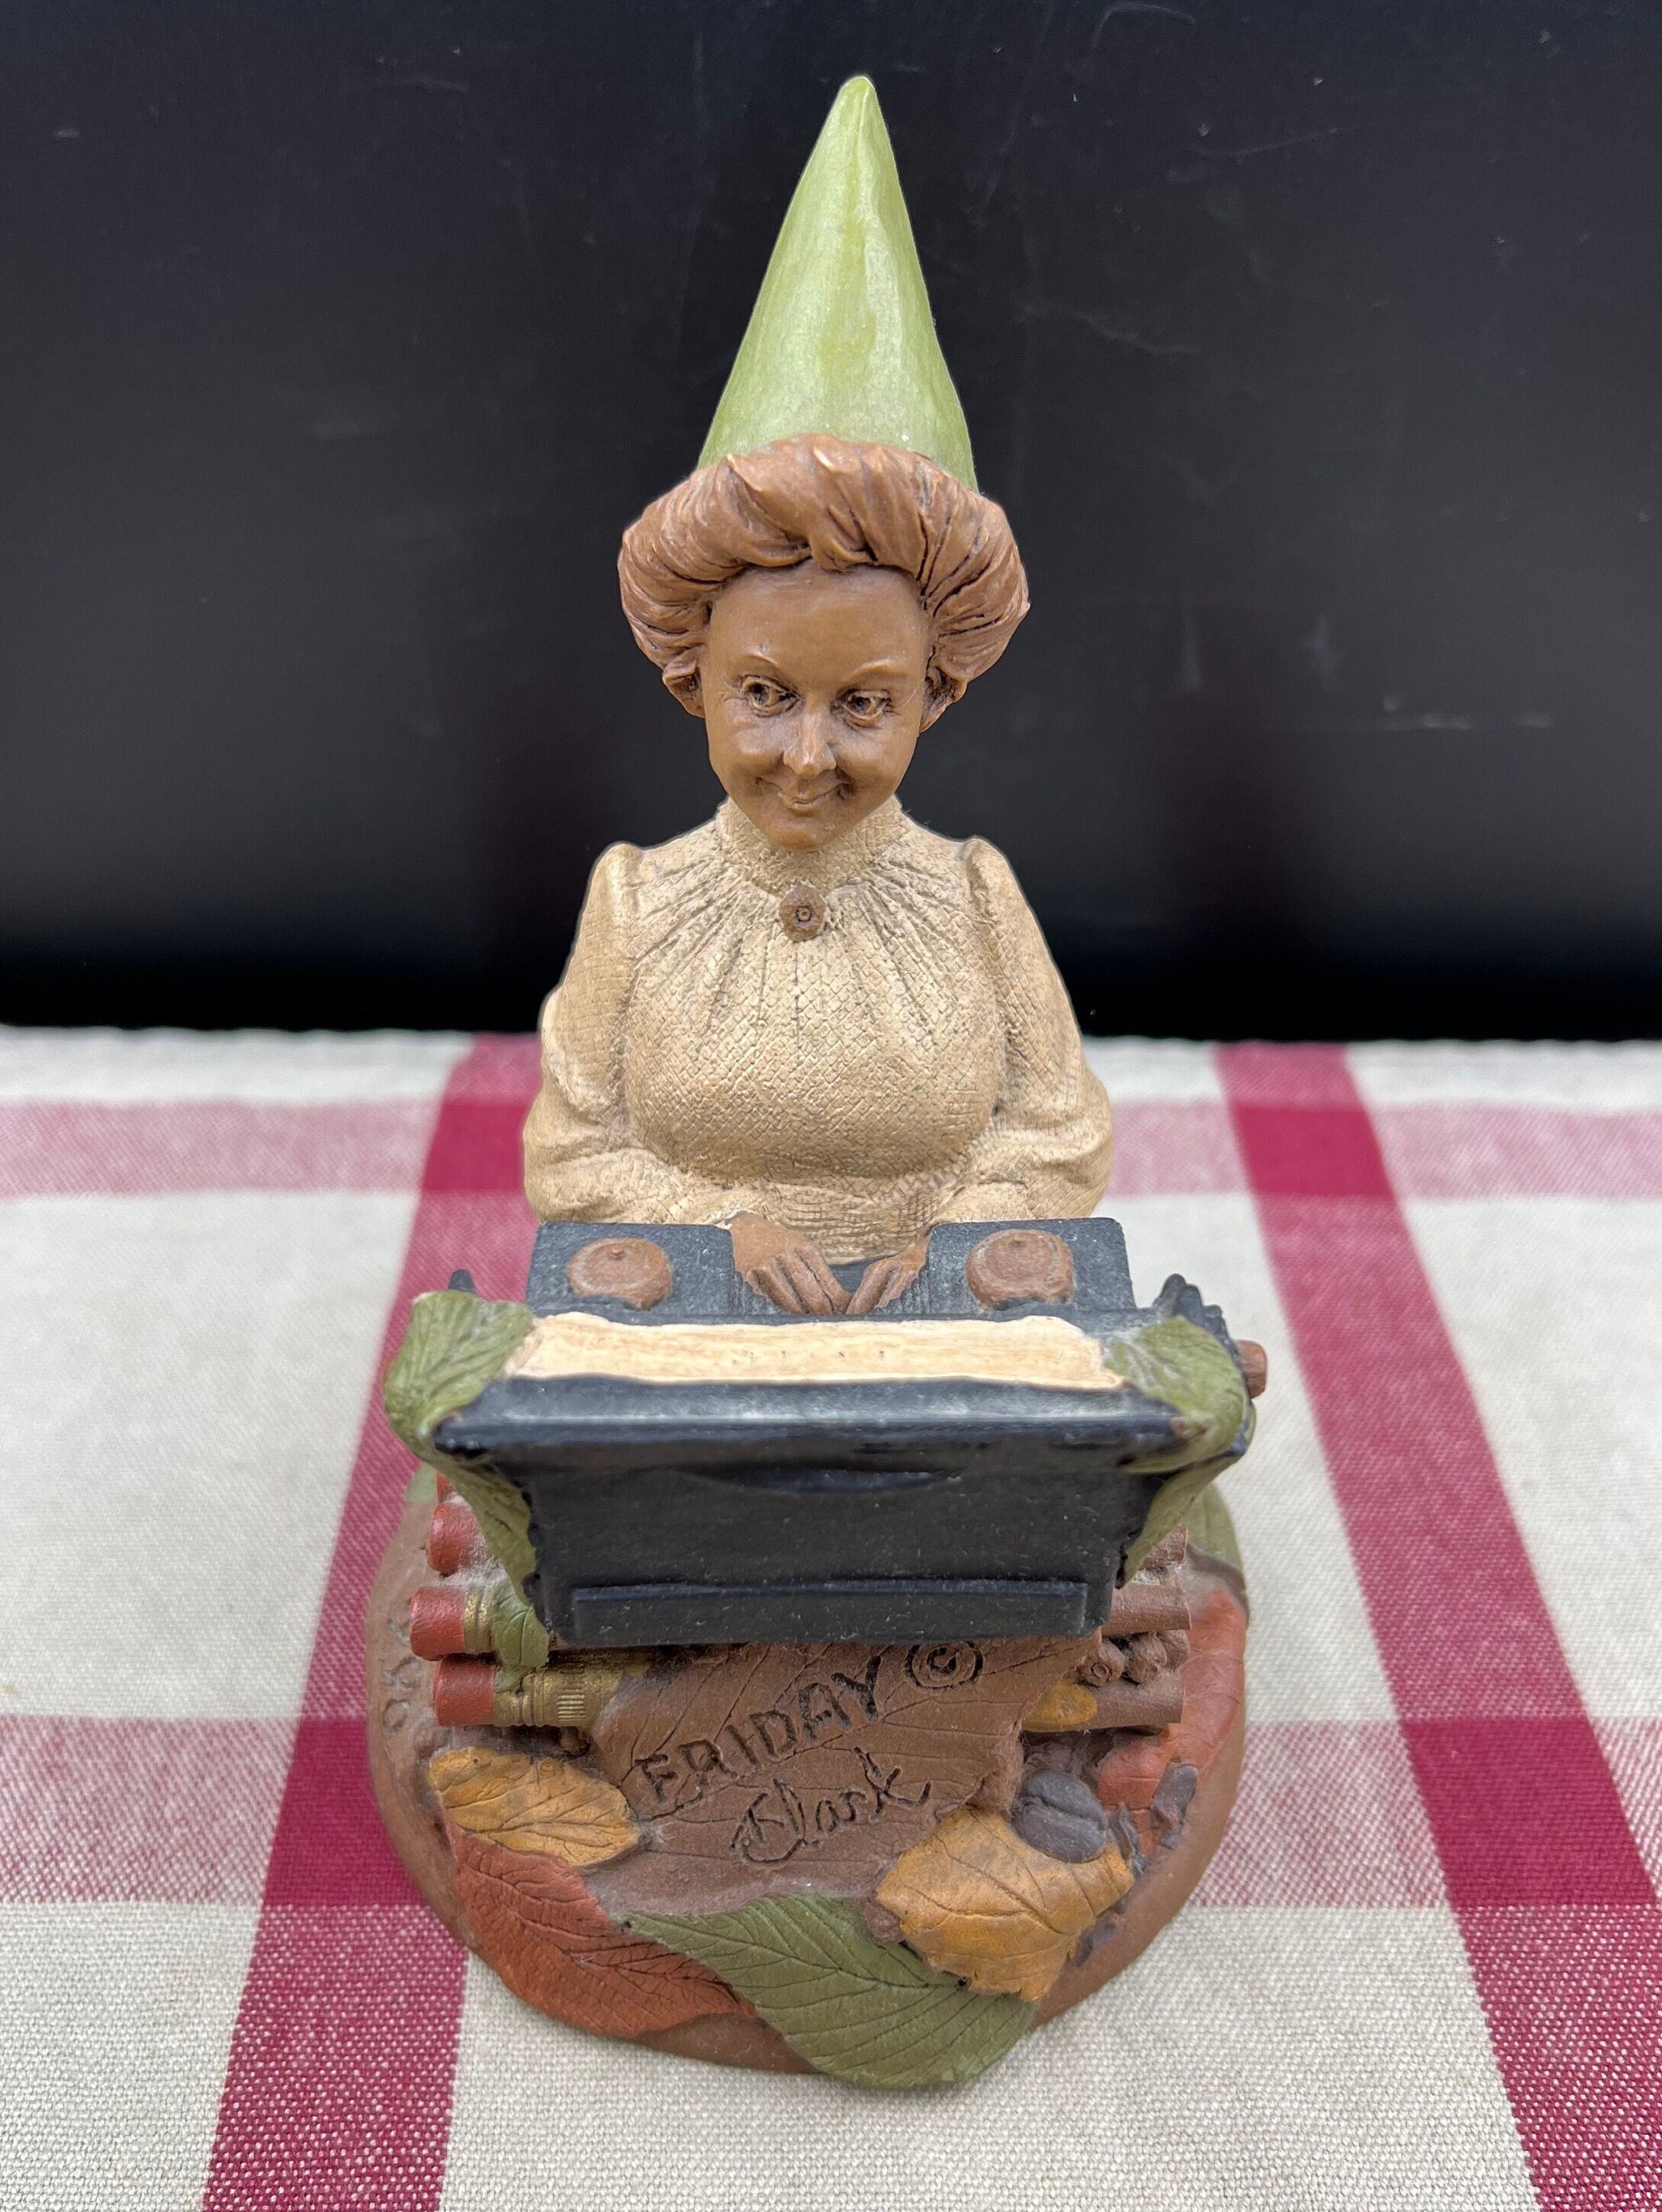 TOM CLARK CAIRN STUDIOS SIGNED OLYMPIA LADY IN SHOE GNOME 1990 #5119  EXCELLENT